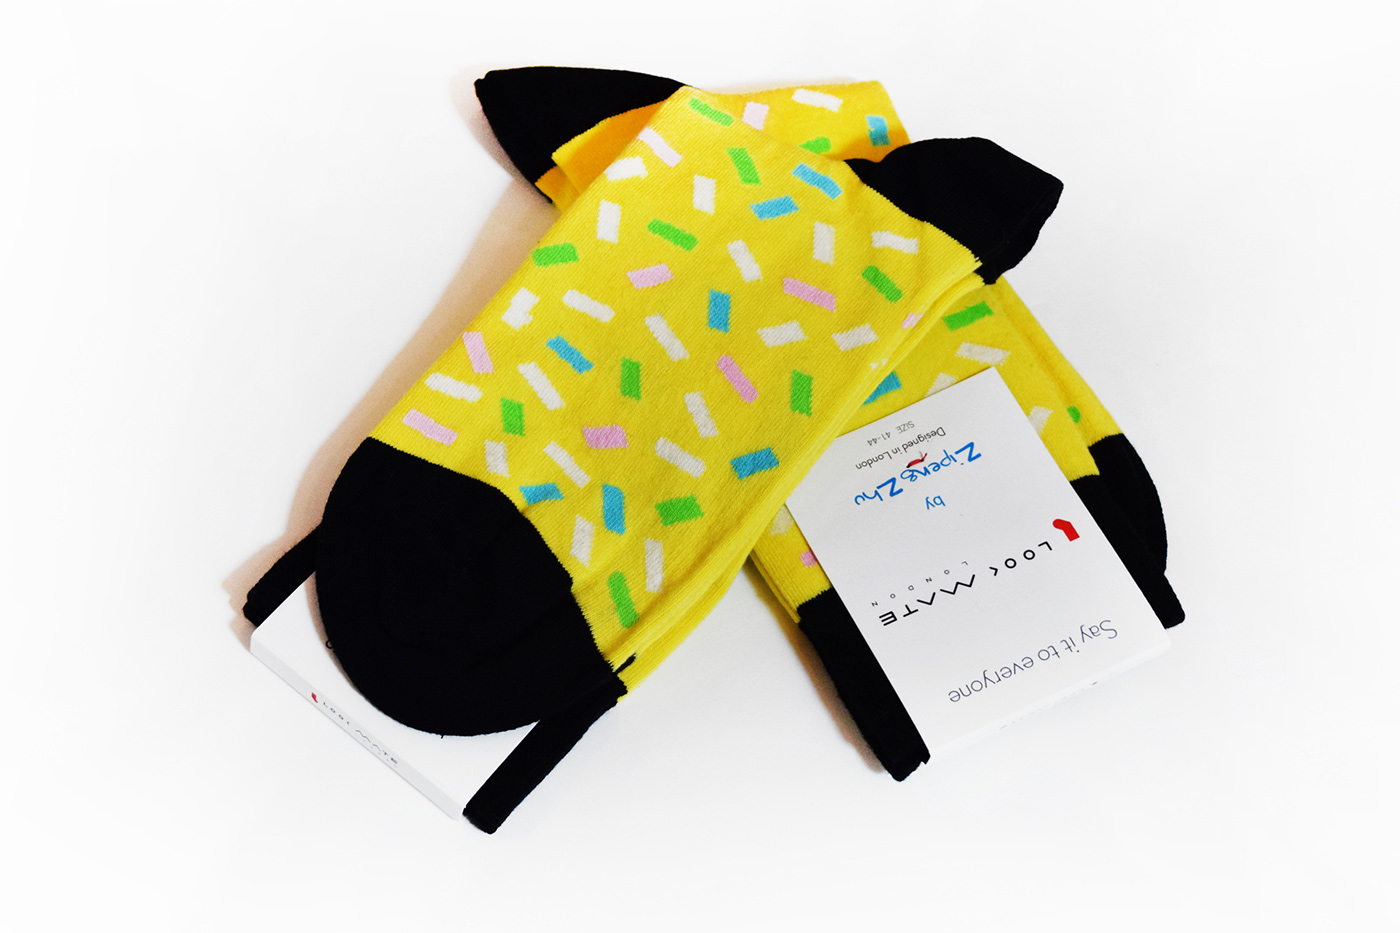 socks mensfashion Fashion  design creative Packaging graphicdesign lookmate lifestyle